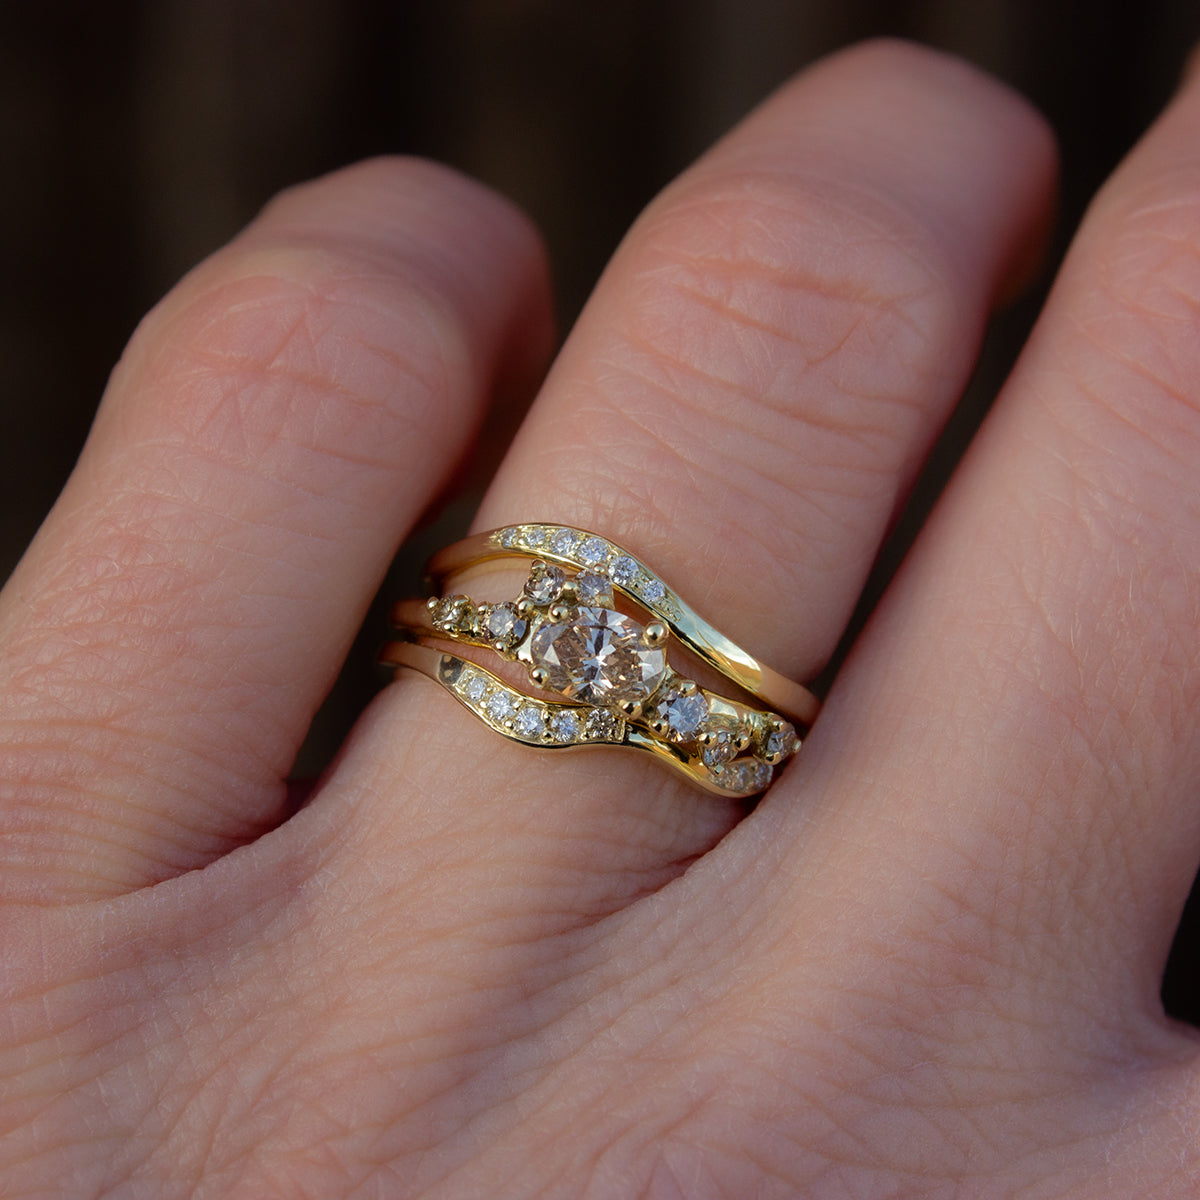 Alternative, modern engagement ring featuring beautiful champagne diamonds organically wrapped along the band. Showcased with two curved diamond bands.